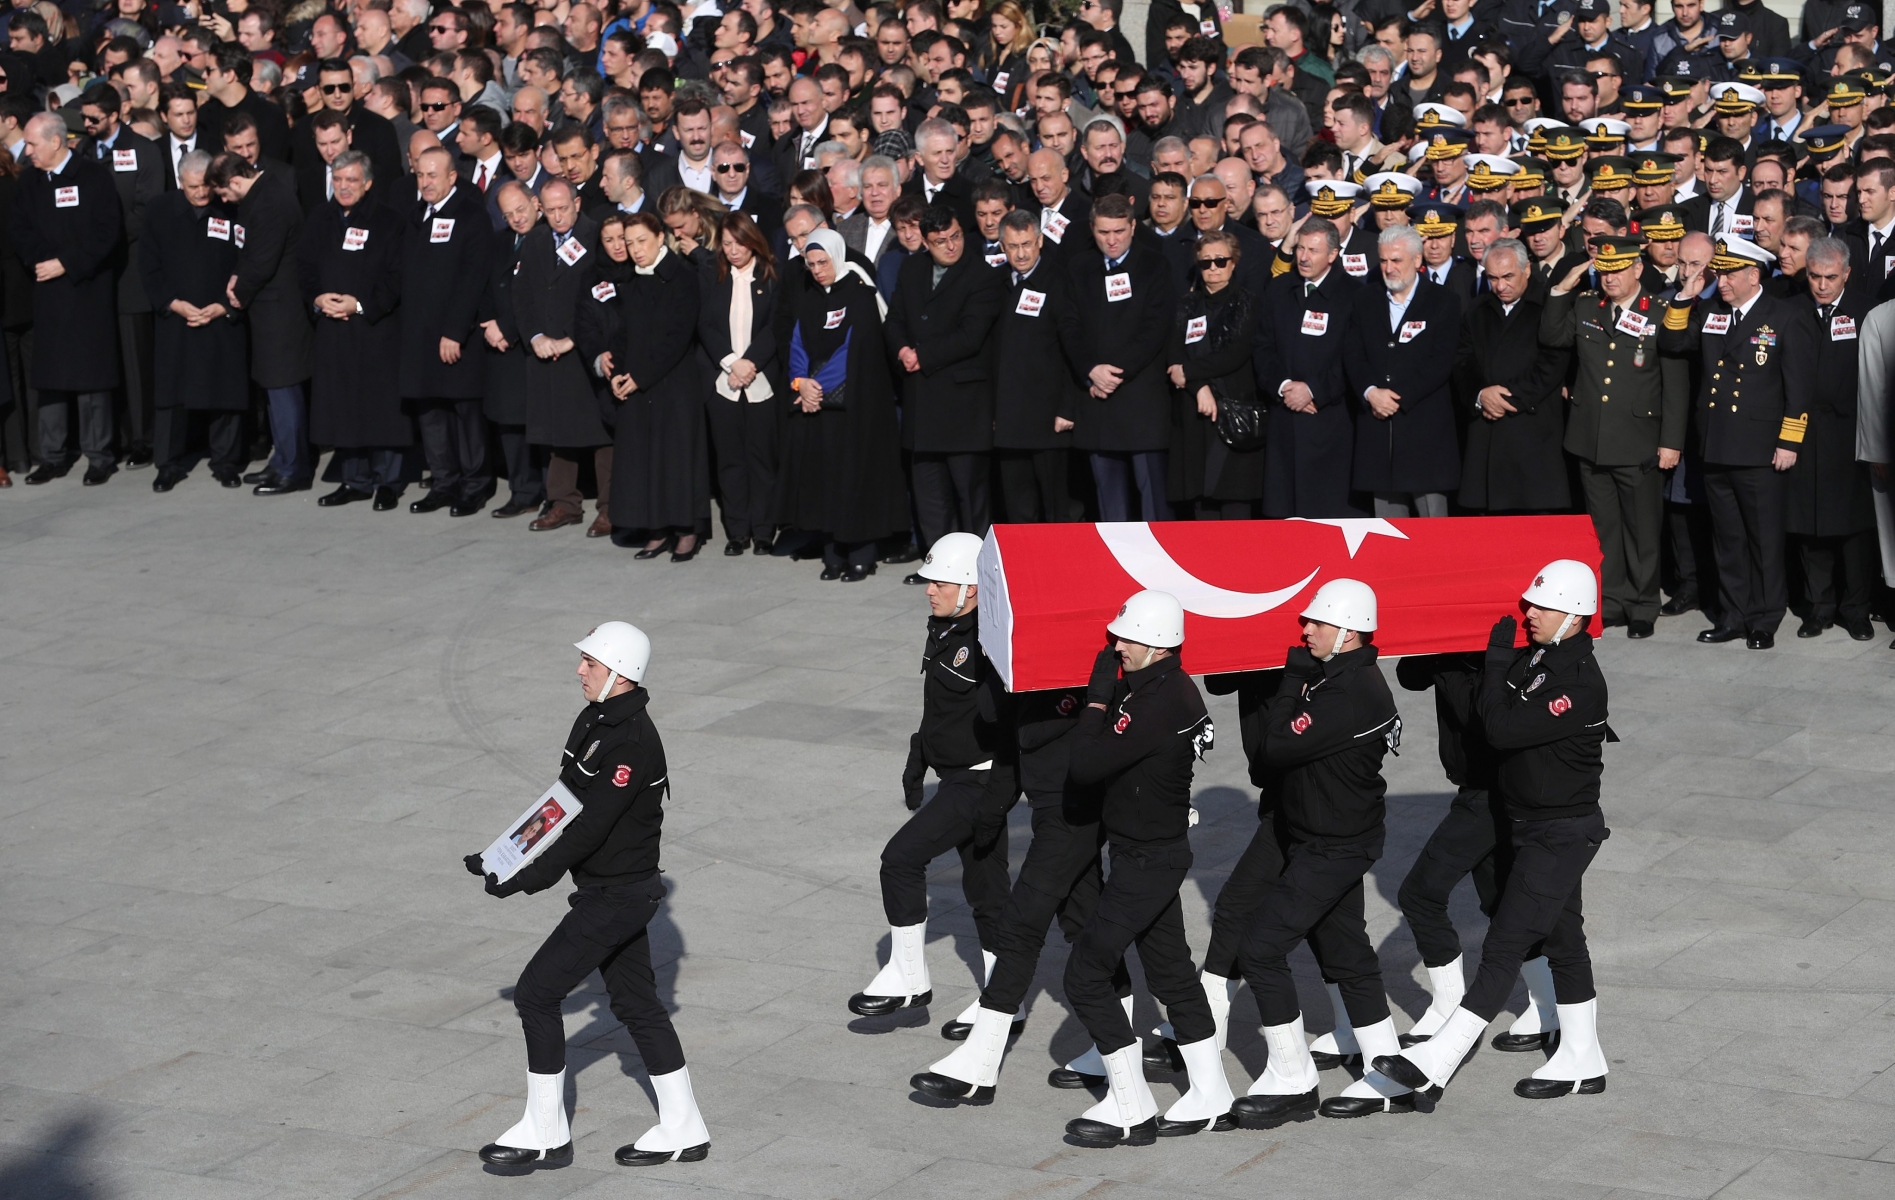 epa05670328 Police officers carry the coffin of a colleague who was killed in bomb attacks at the Vodafone Stadium in Besiktas a day earlier during the funeral in Istanbul, Turkey, 11 December 2016. At least 38 people were killed and 166 other wounded in two explosions outside Besiktas Stadium and in nearby Macka Park a few hours after the night's soccer match on 10 December. The bombs apparently targeted police officers who were securing the match.  EPA/SEDAT SUNA TURKEY BOMB ATTACK AFTERMATH